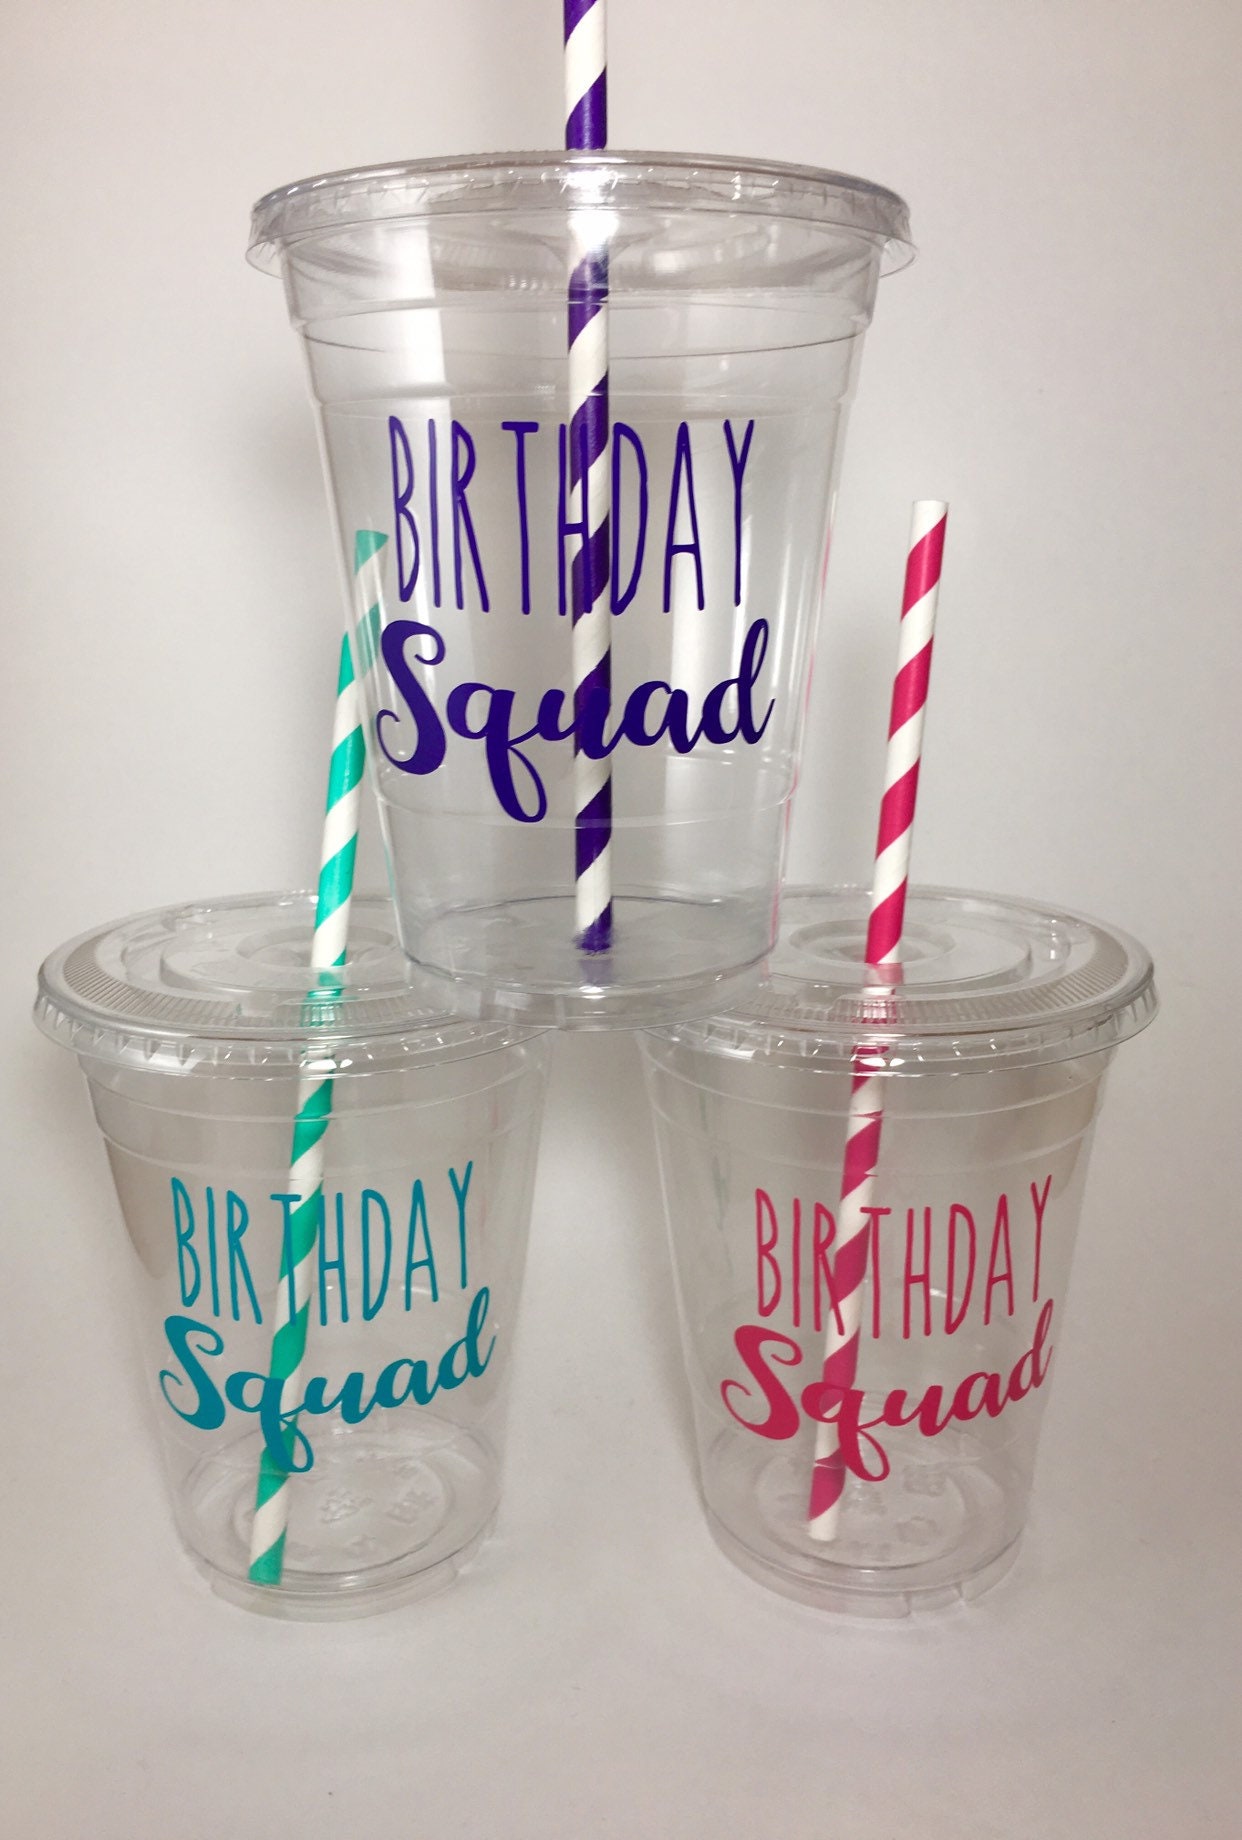 Charlie Brown Party Cups Snoopy Disposable Birthday With Lids Straws 